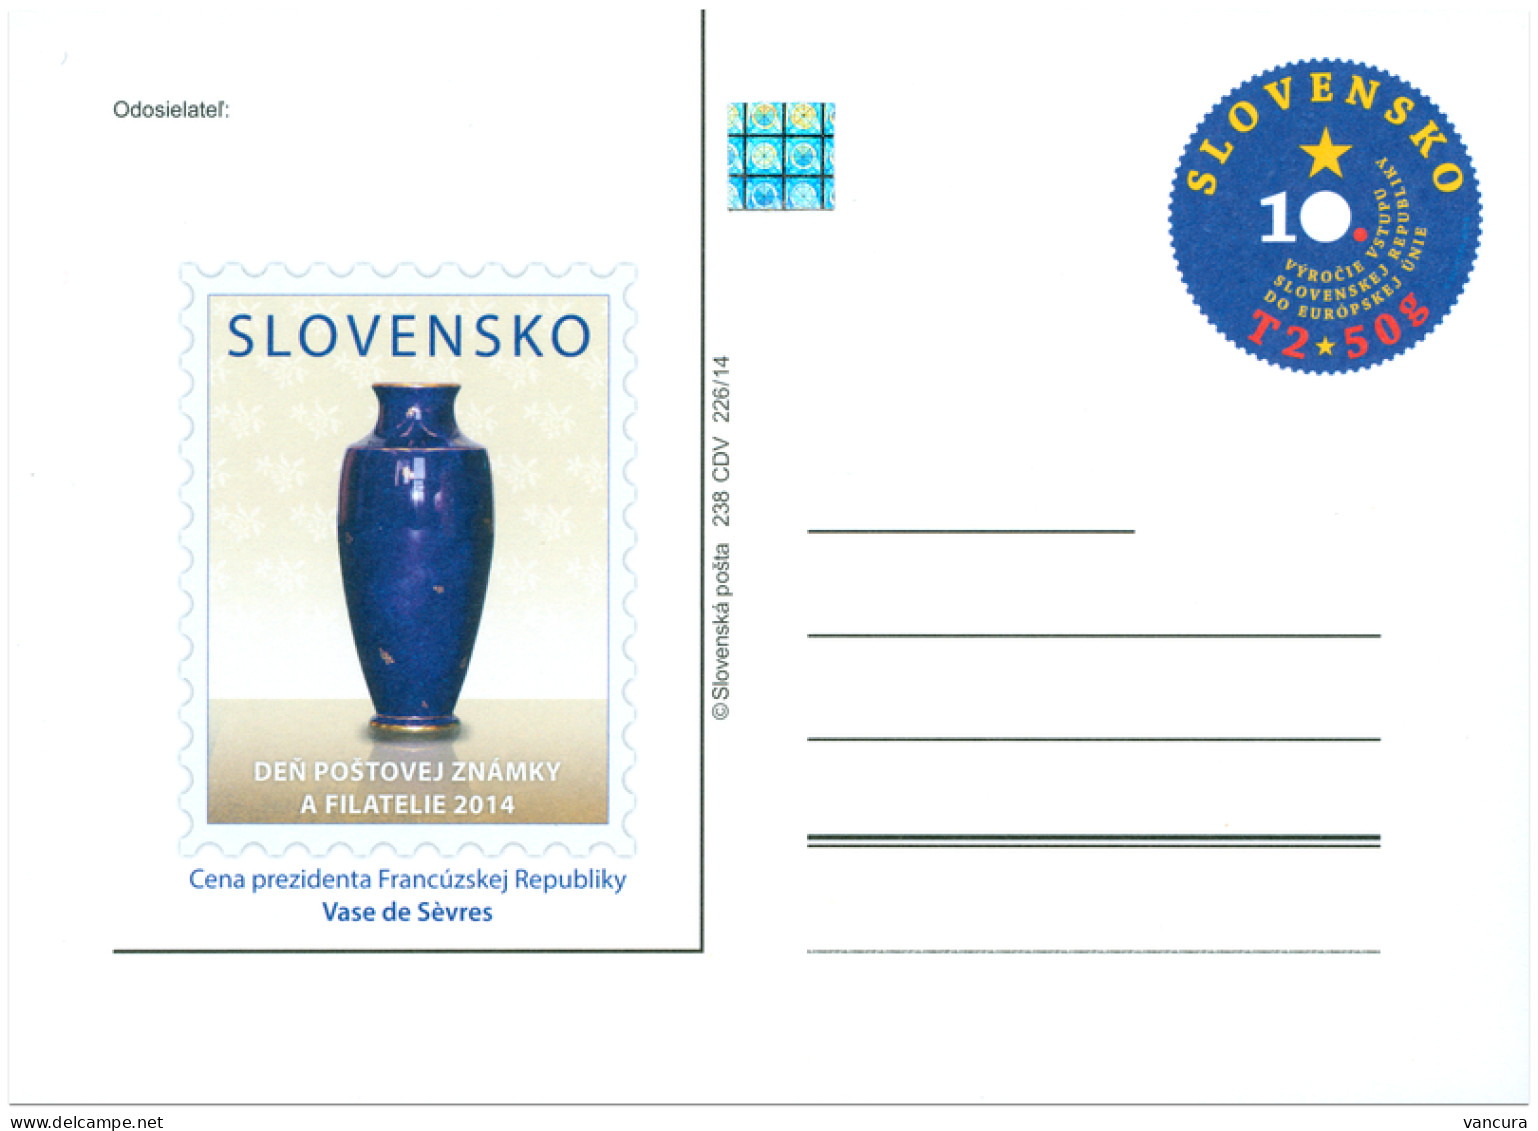 CDV 238 Slovakia Day Of The Stamp And Philately 2014 Sevres Vase - Porcelain